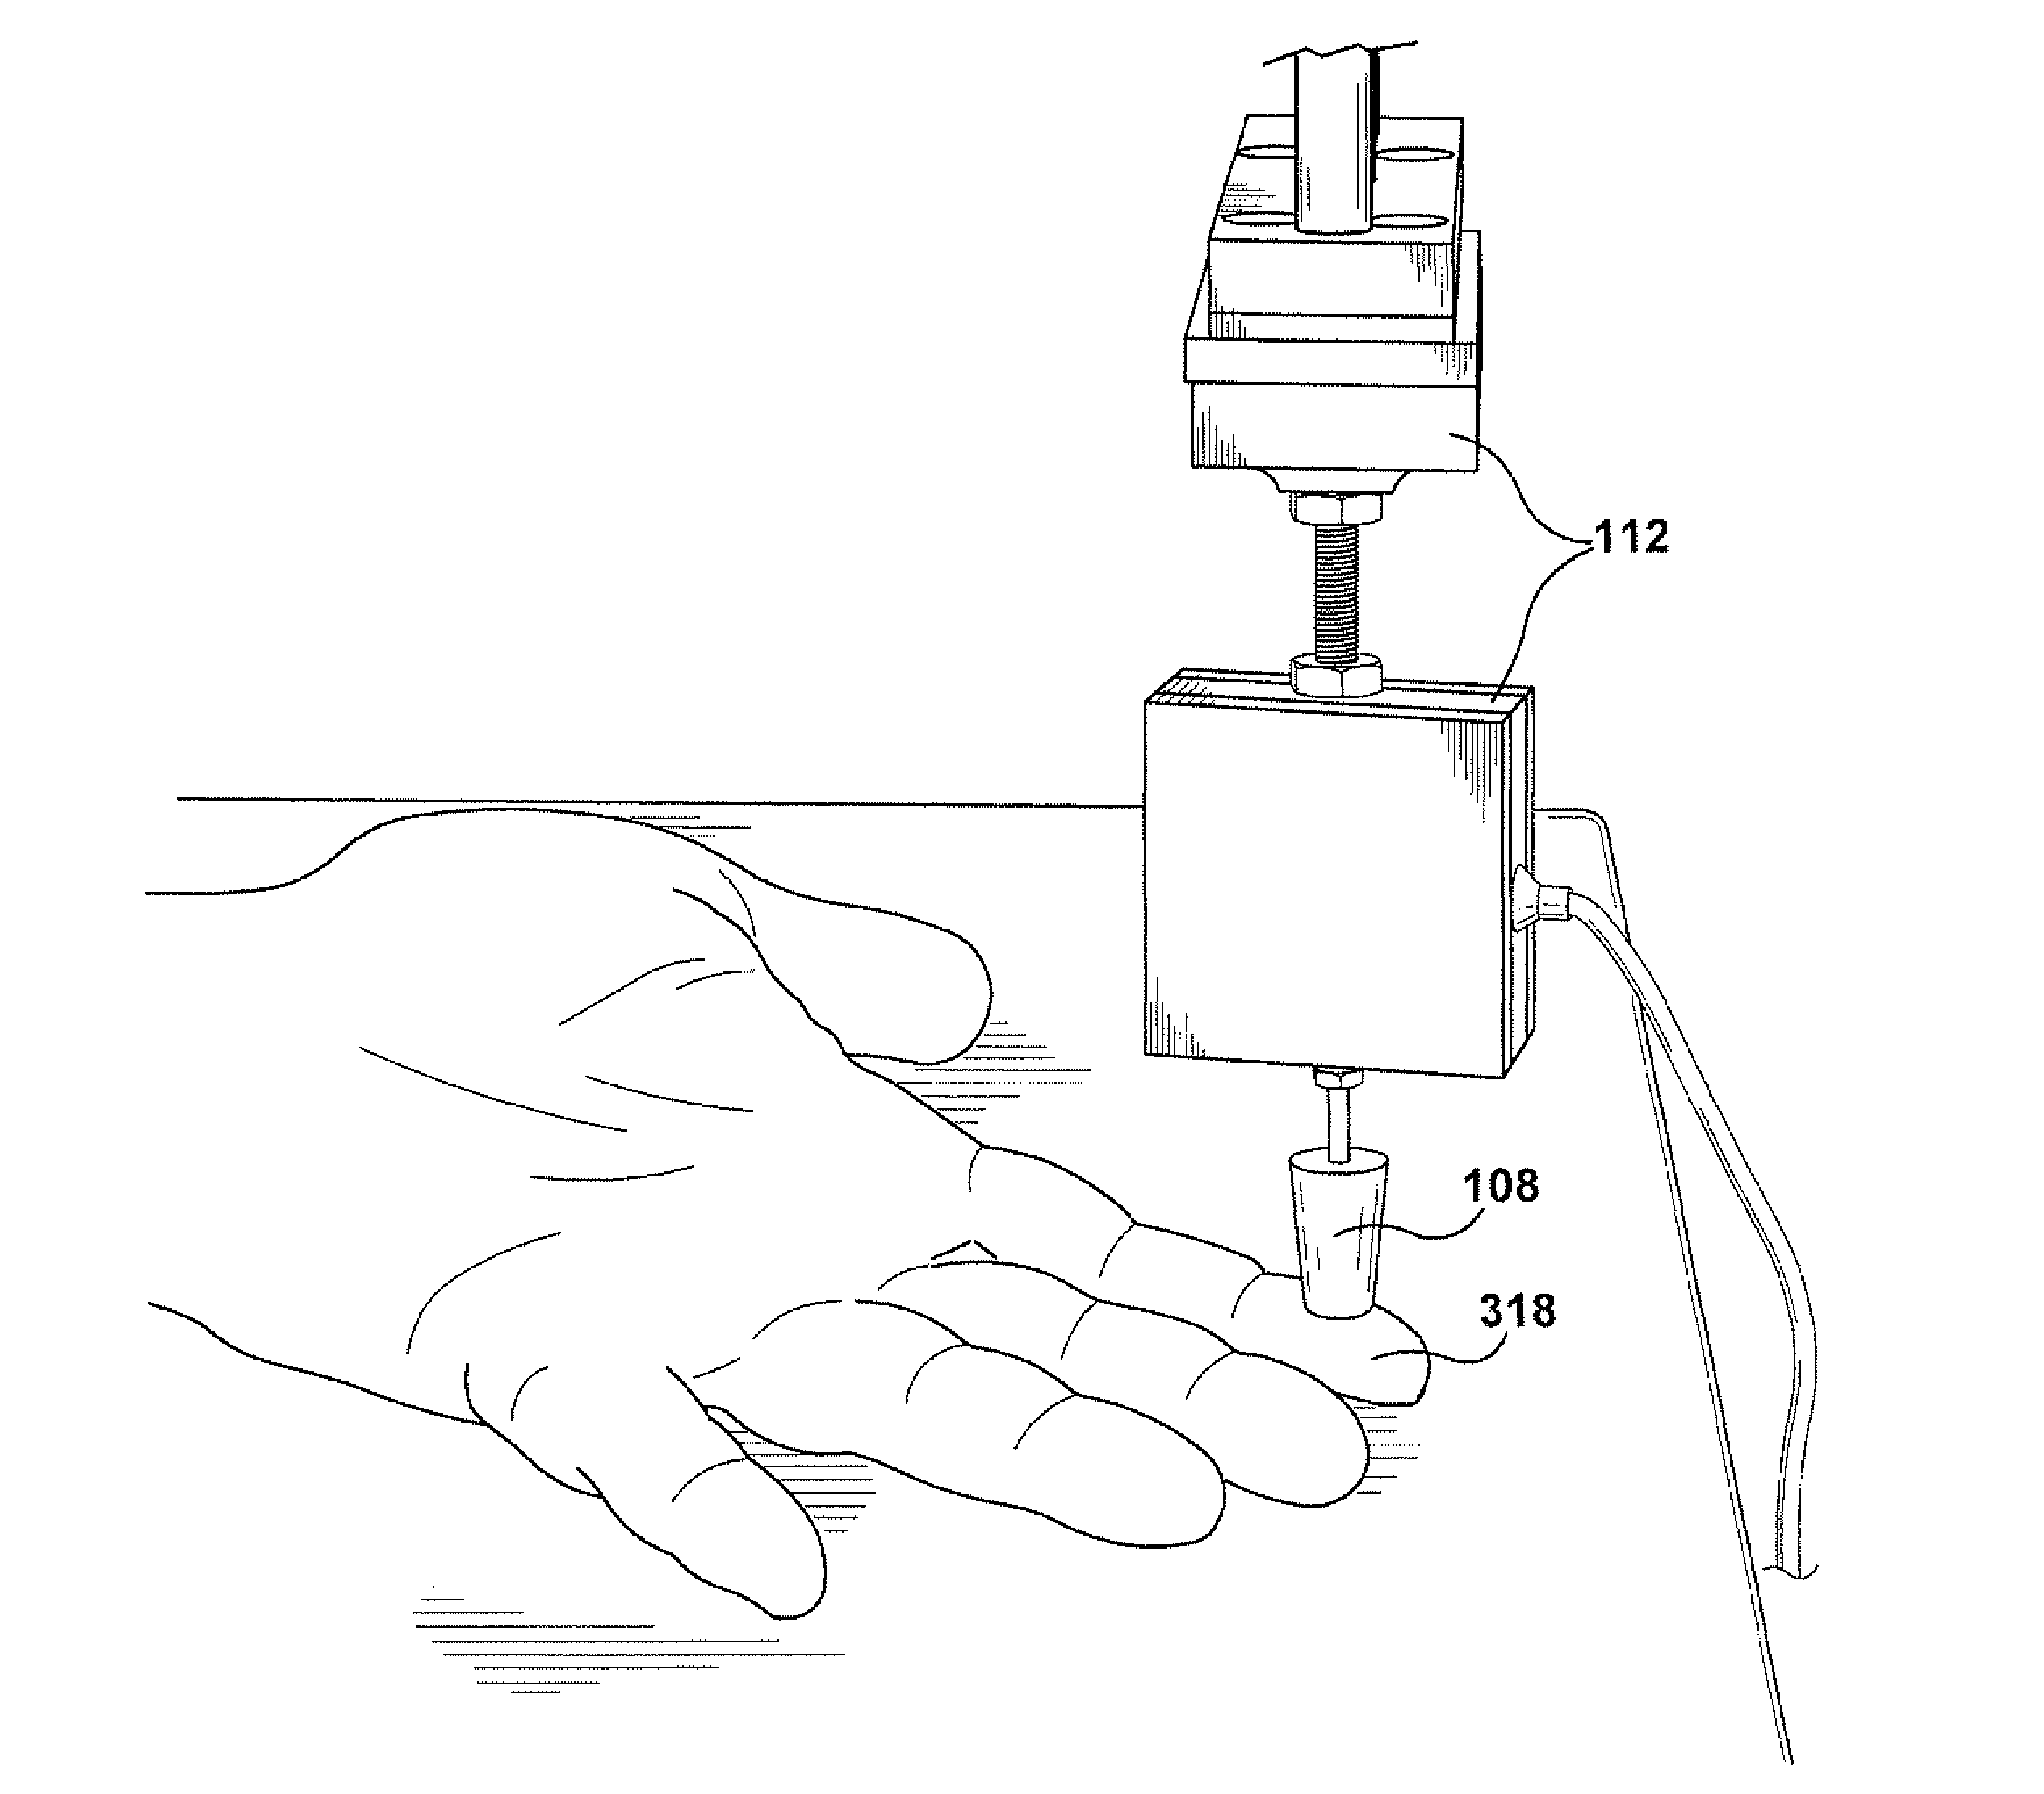 Apparatus and method for exerting force on a subject tissue